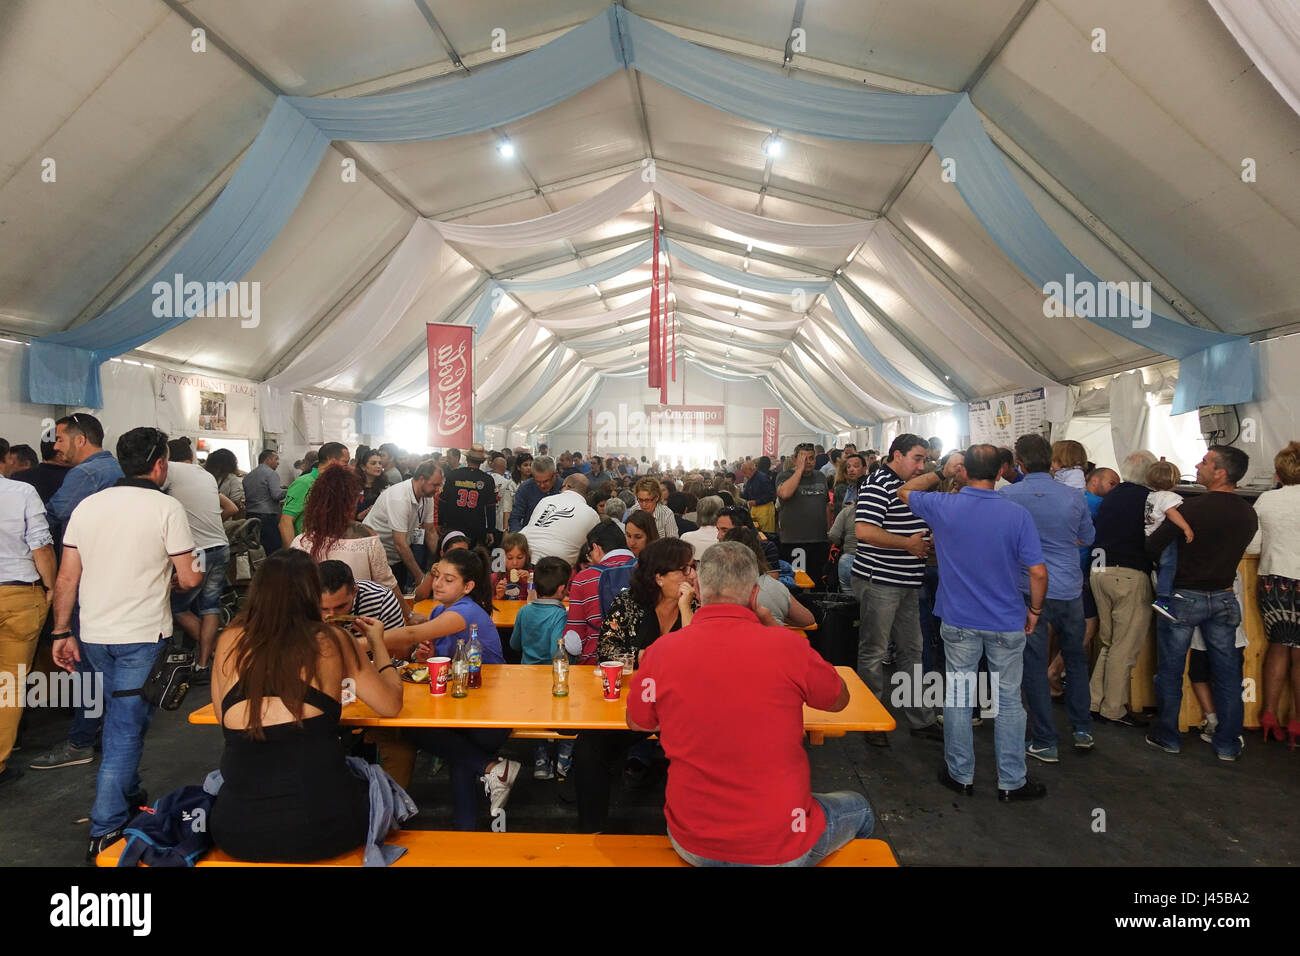 Interior tent, Seafood festival, event, festive in port of Benalmadena, Andalusia, Spain. Stock Photo